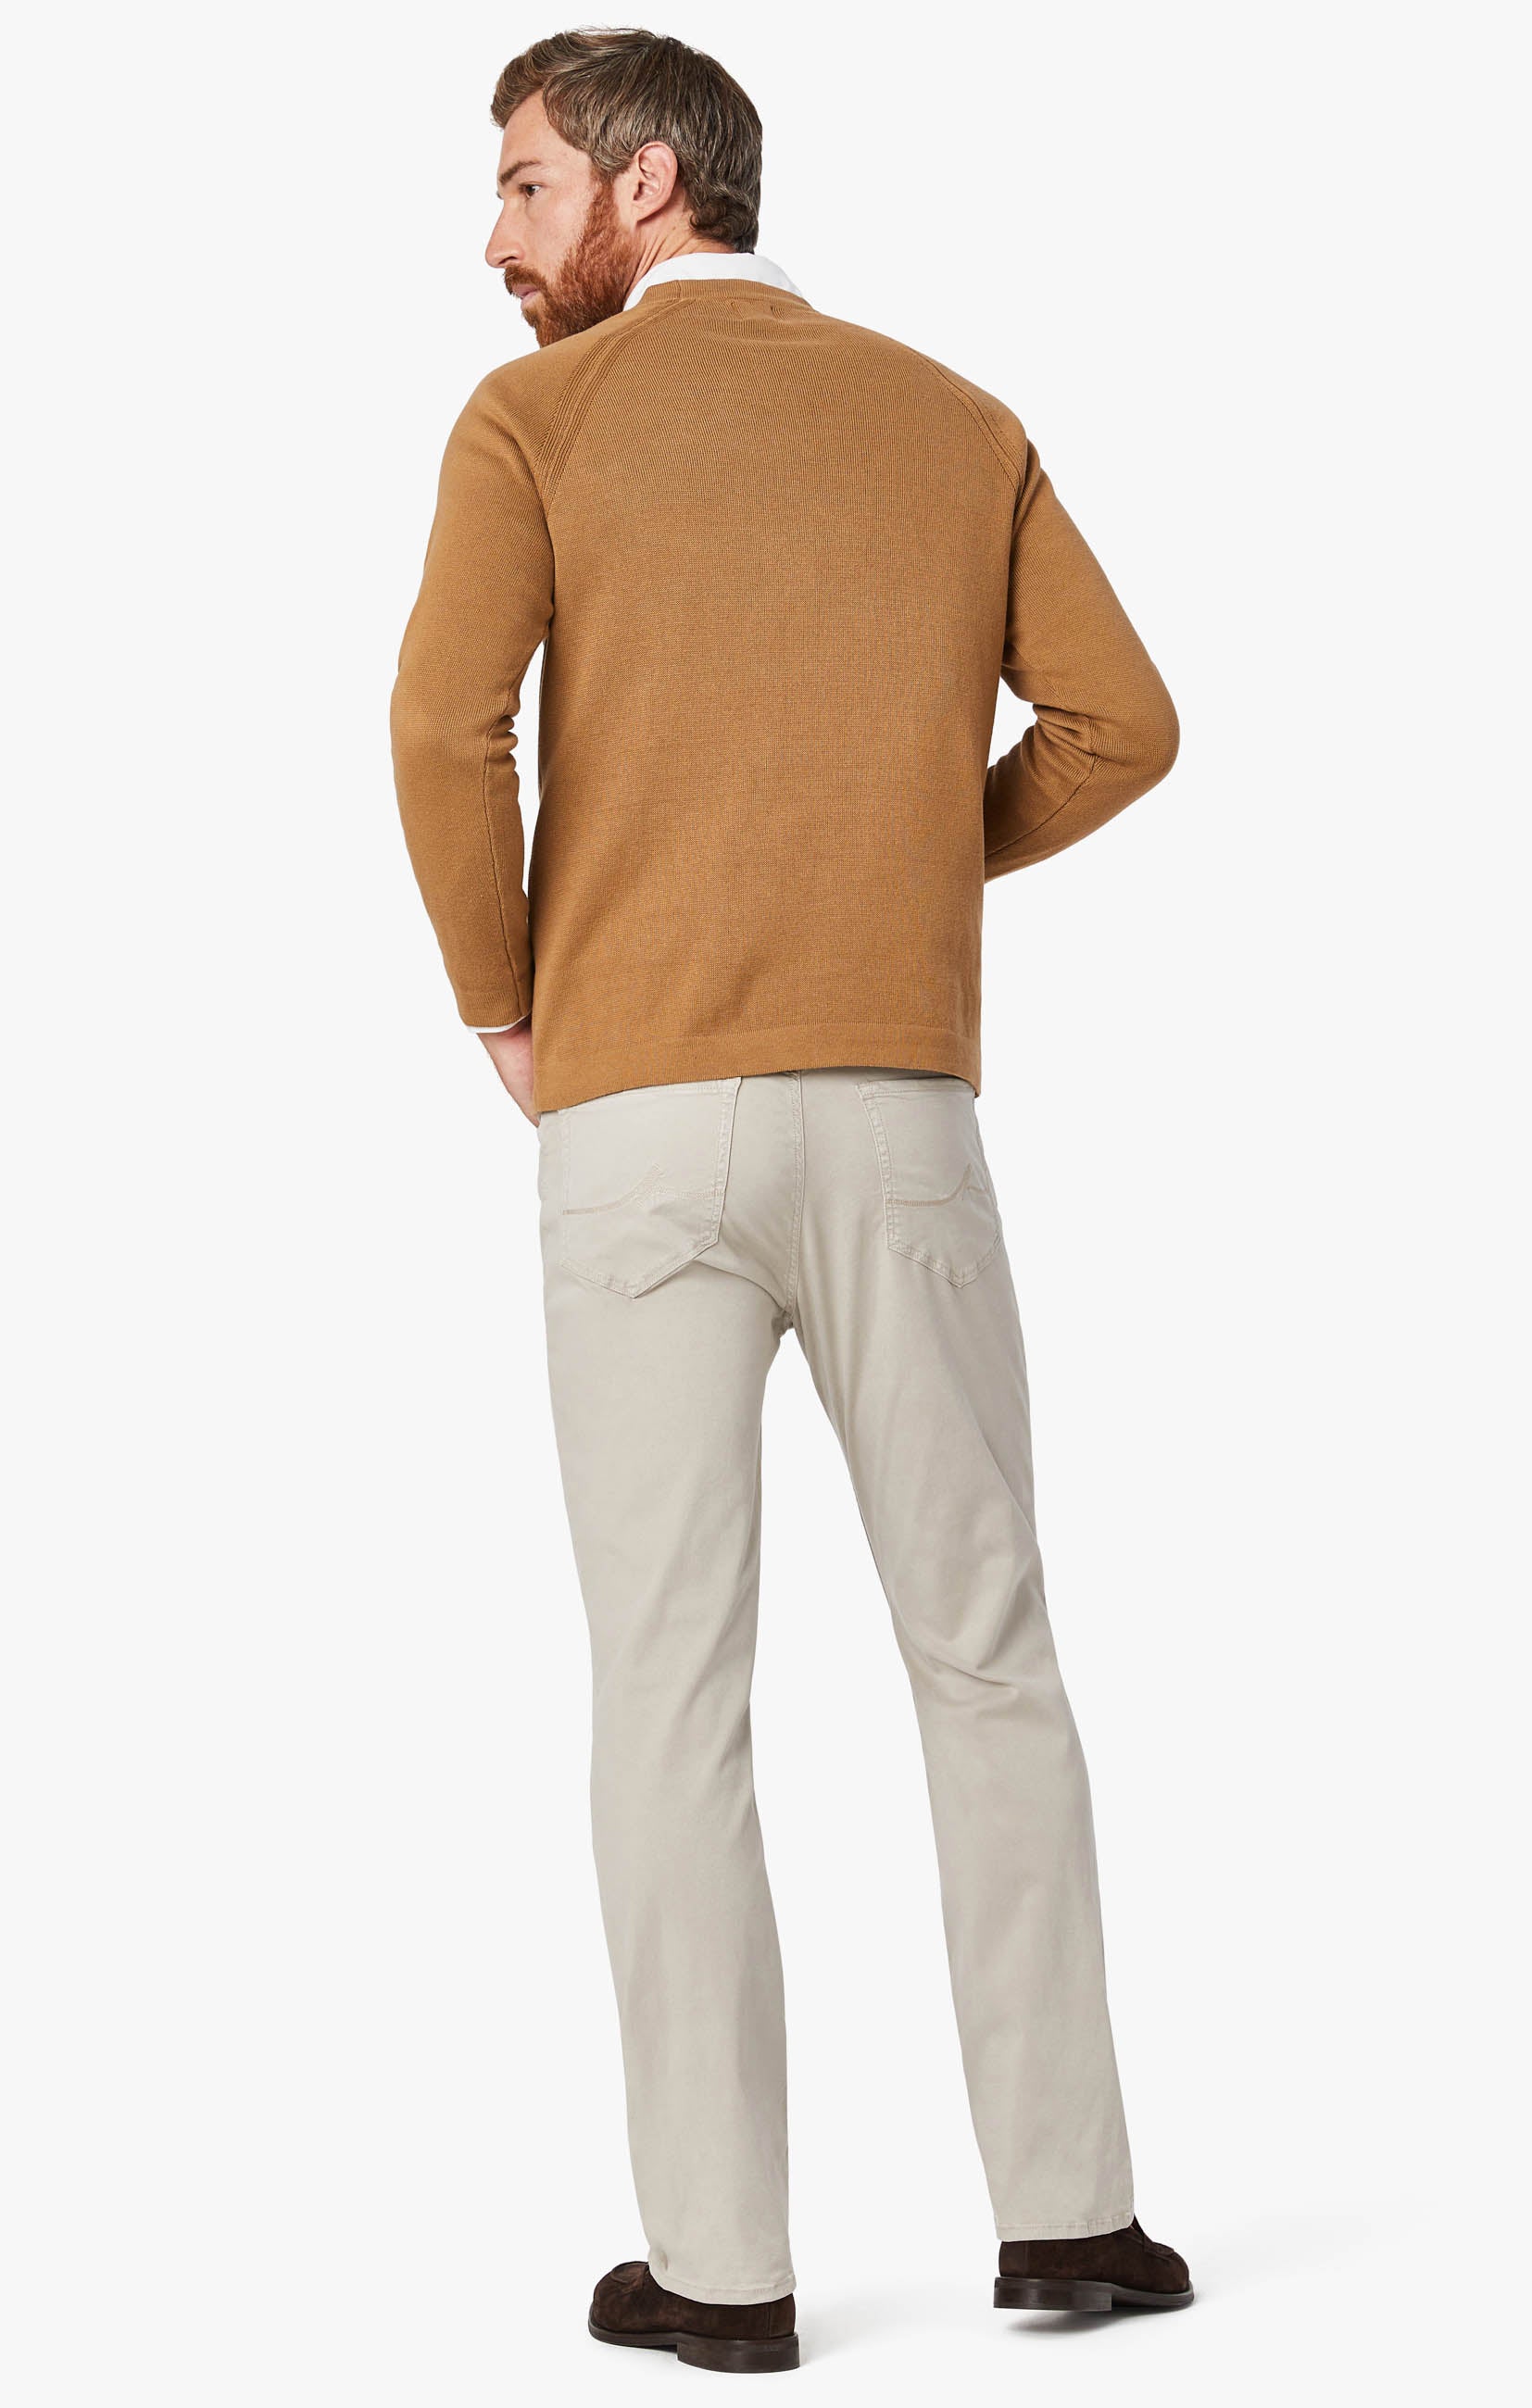 Charisma Relaxed Straight Leg Pants in Dawn Twill Image 1